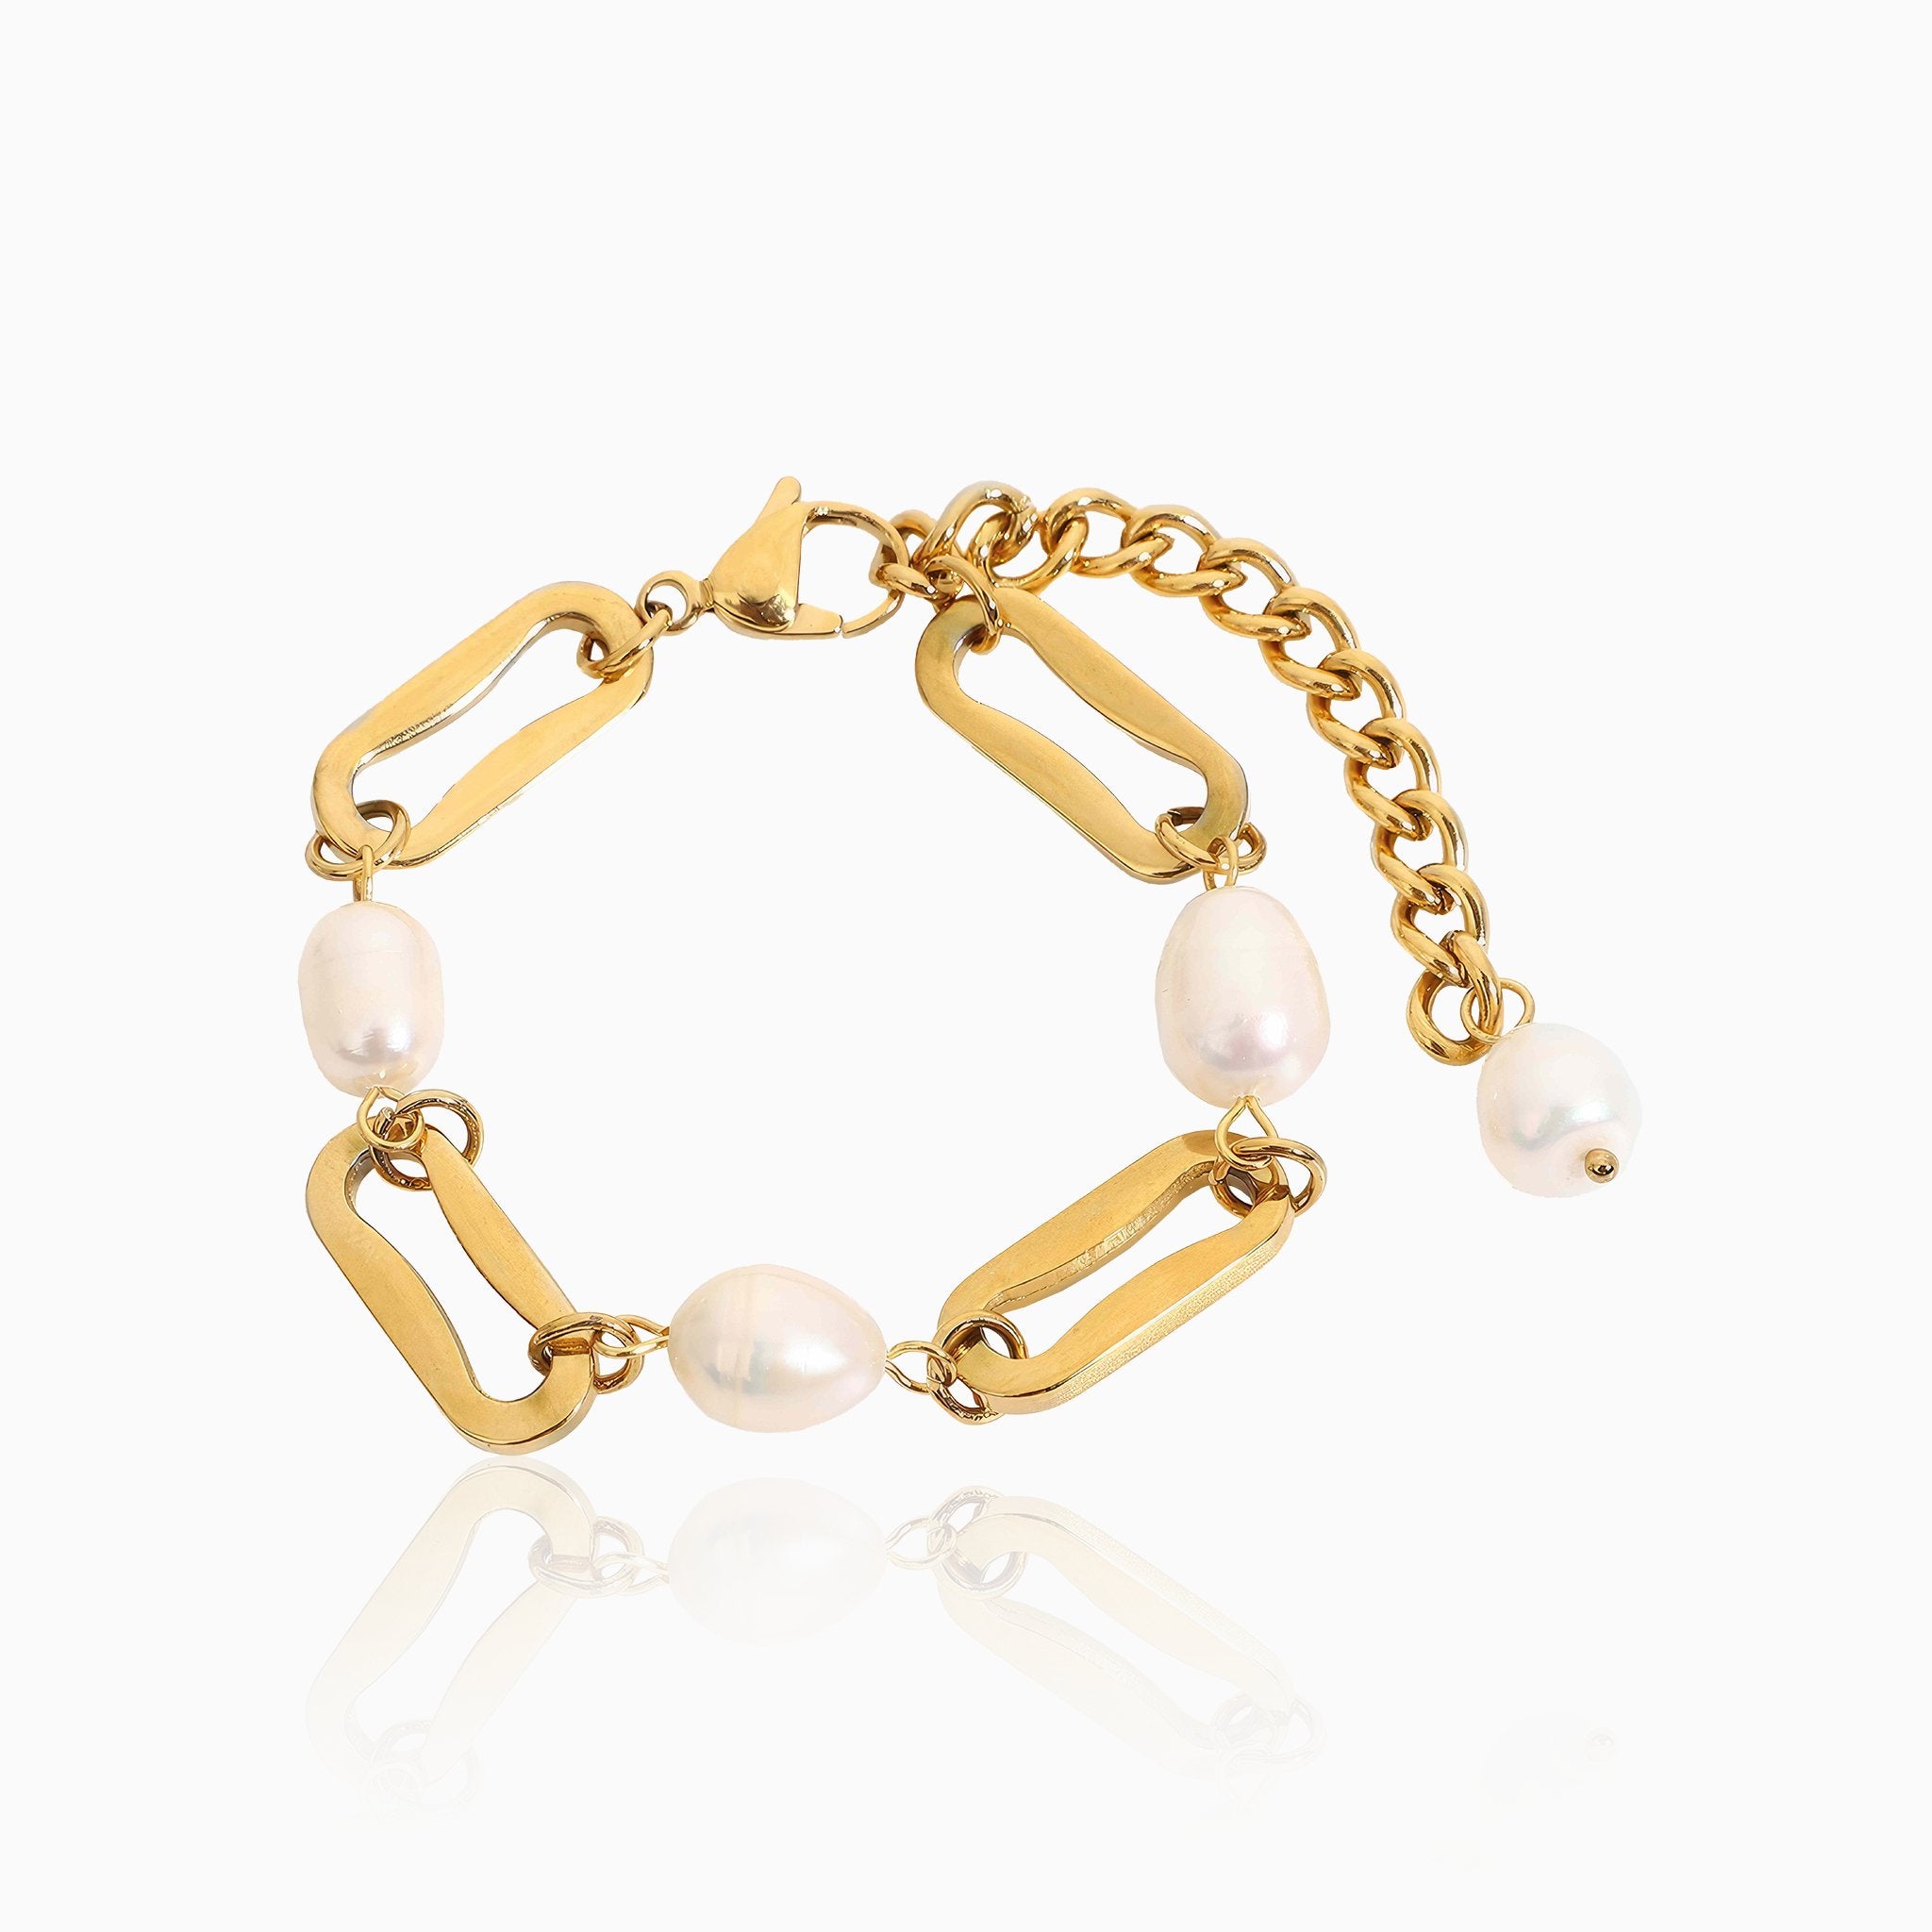 Baroque Pearl Bracelet with Rectangular Chain Spacers - Nobbier - Bracelet - 18K Gold And Titanium PVD Coated Jewelry